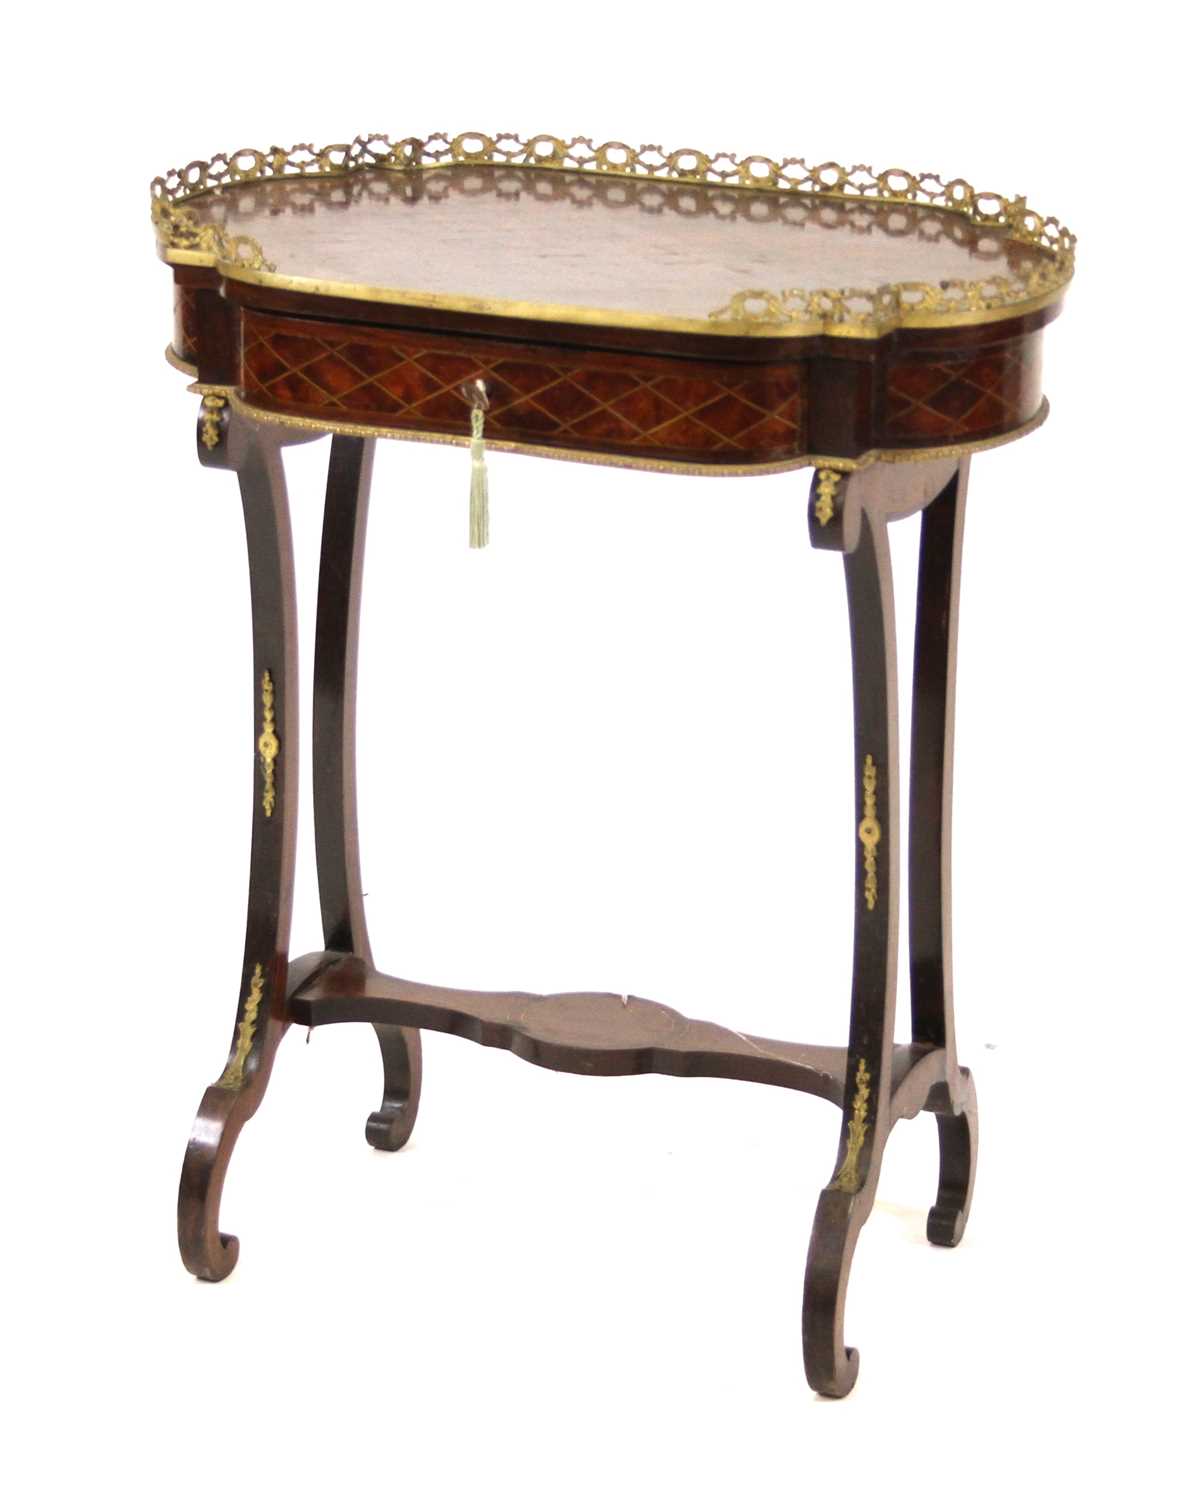 A late 19th century French walnut crossbanded and inlaid gueridon table, having a pierced brass